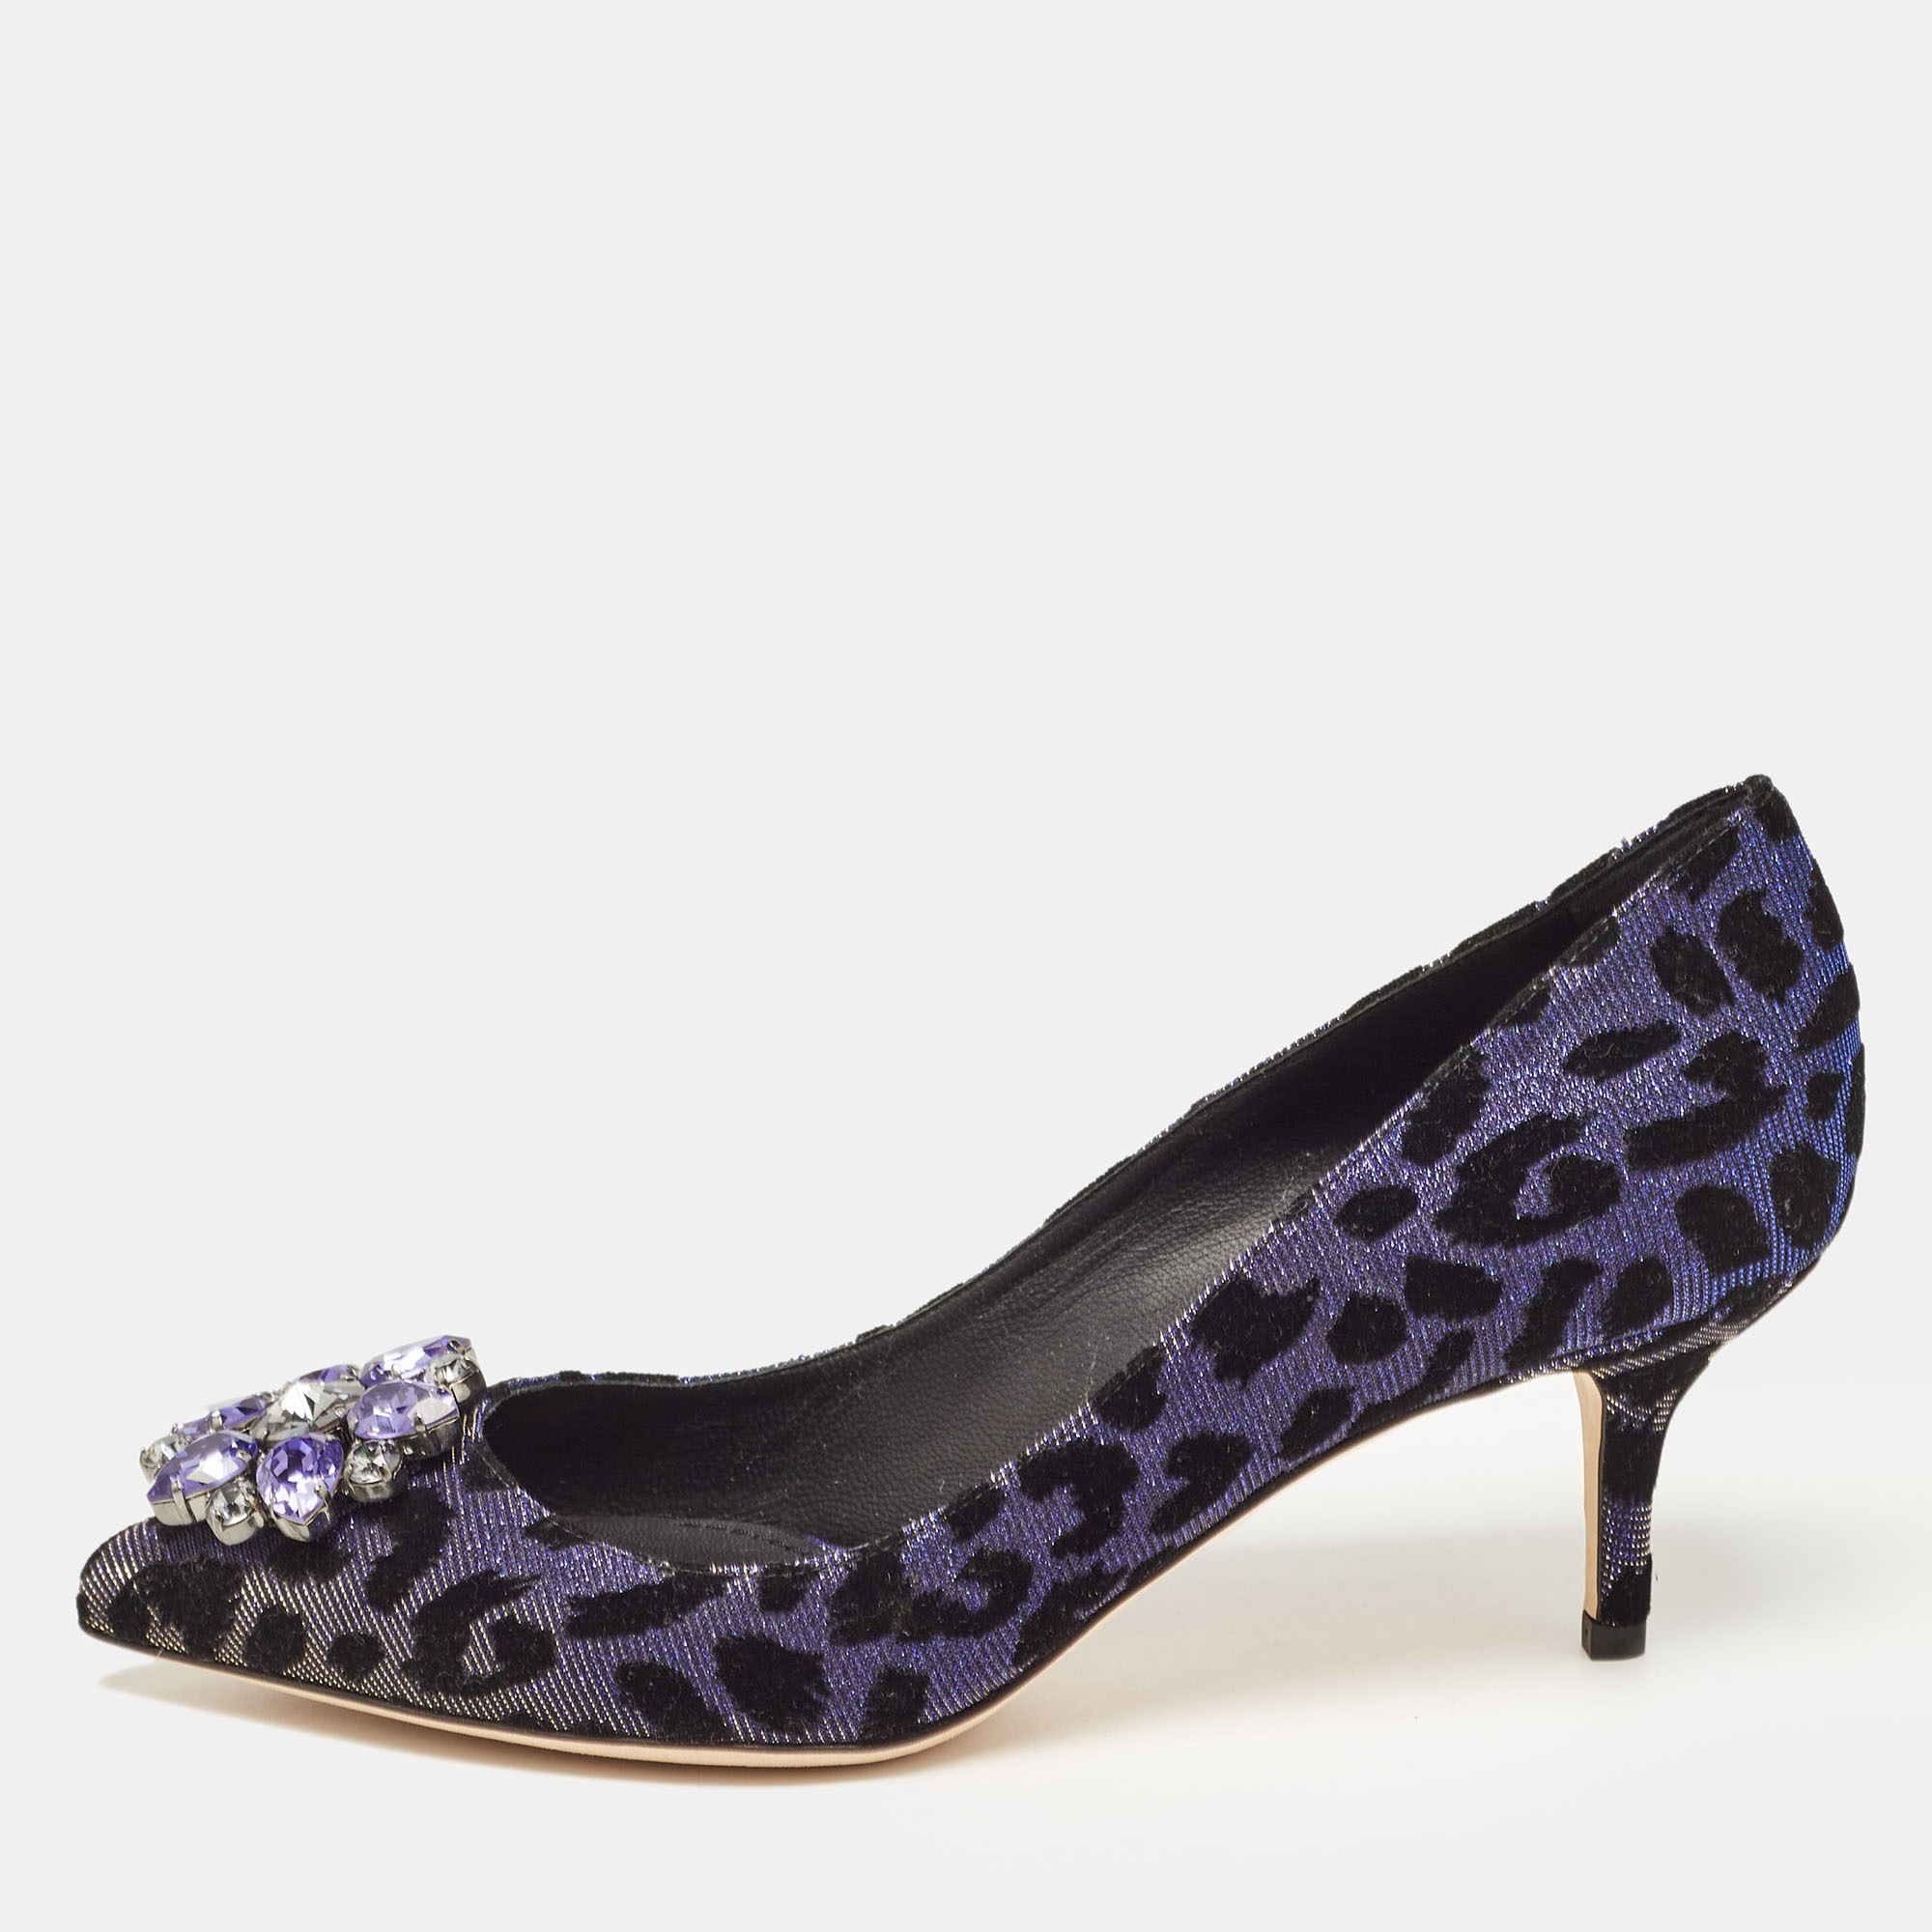 Dolce & Gabbana Black/Purple Glitter Fabric Bellucci Crystal Embellished Pointed Toe Pumps Size 39